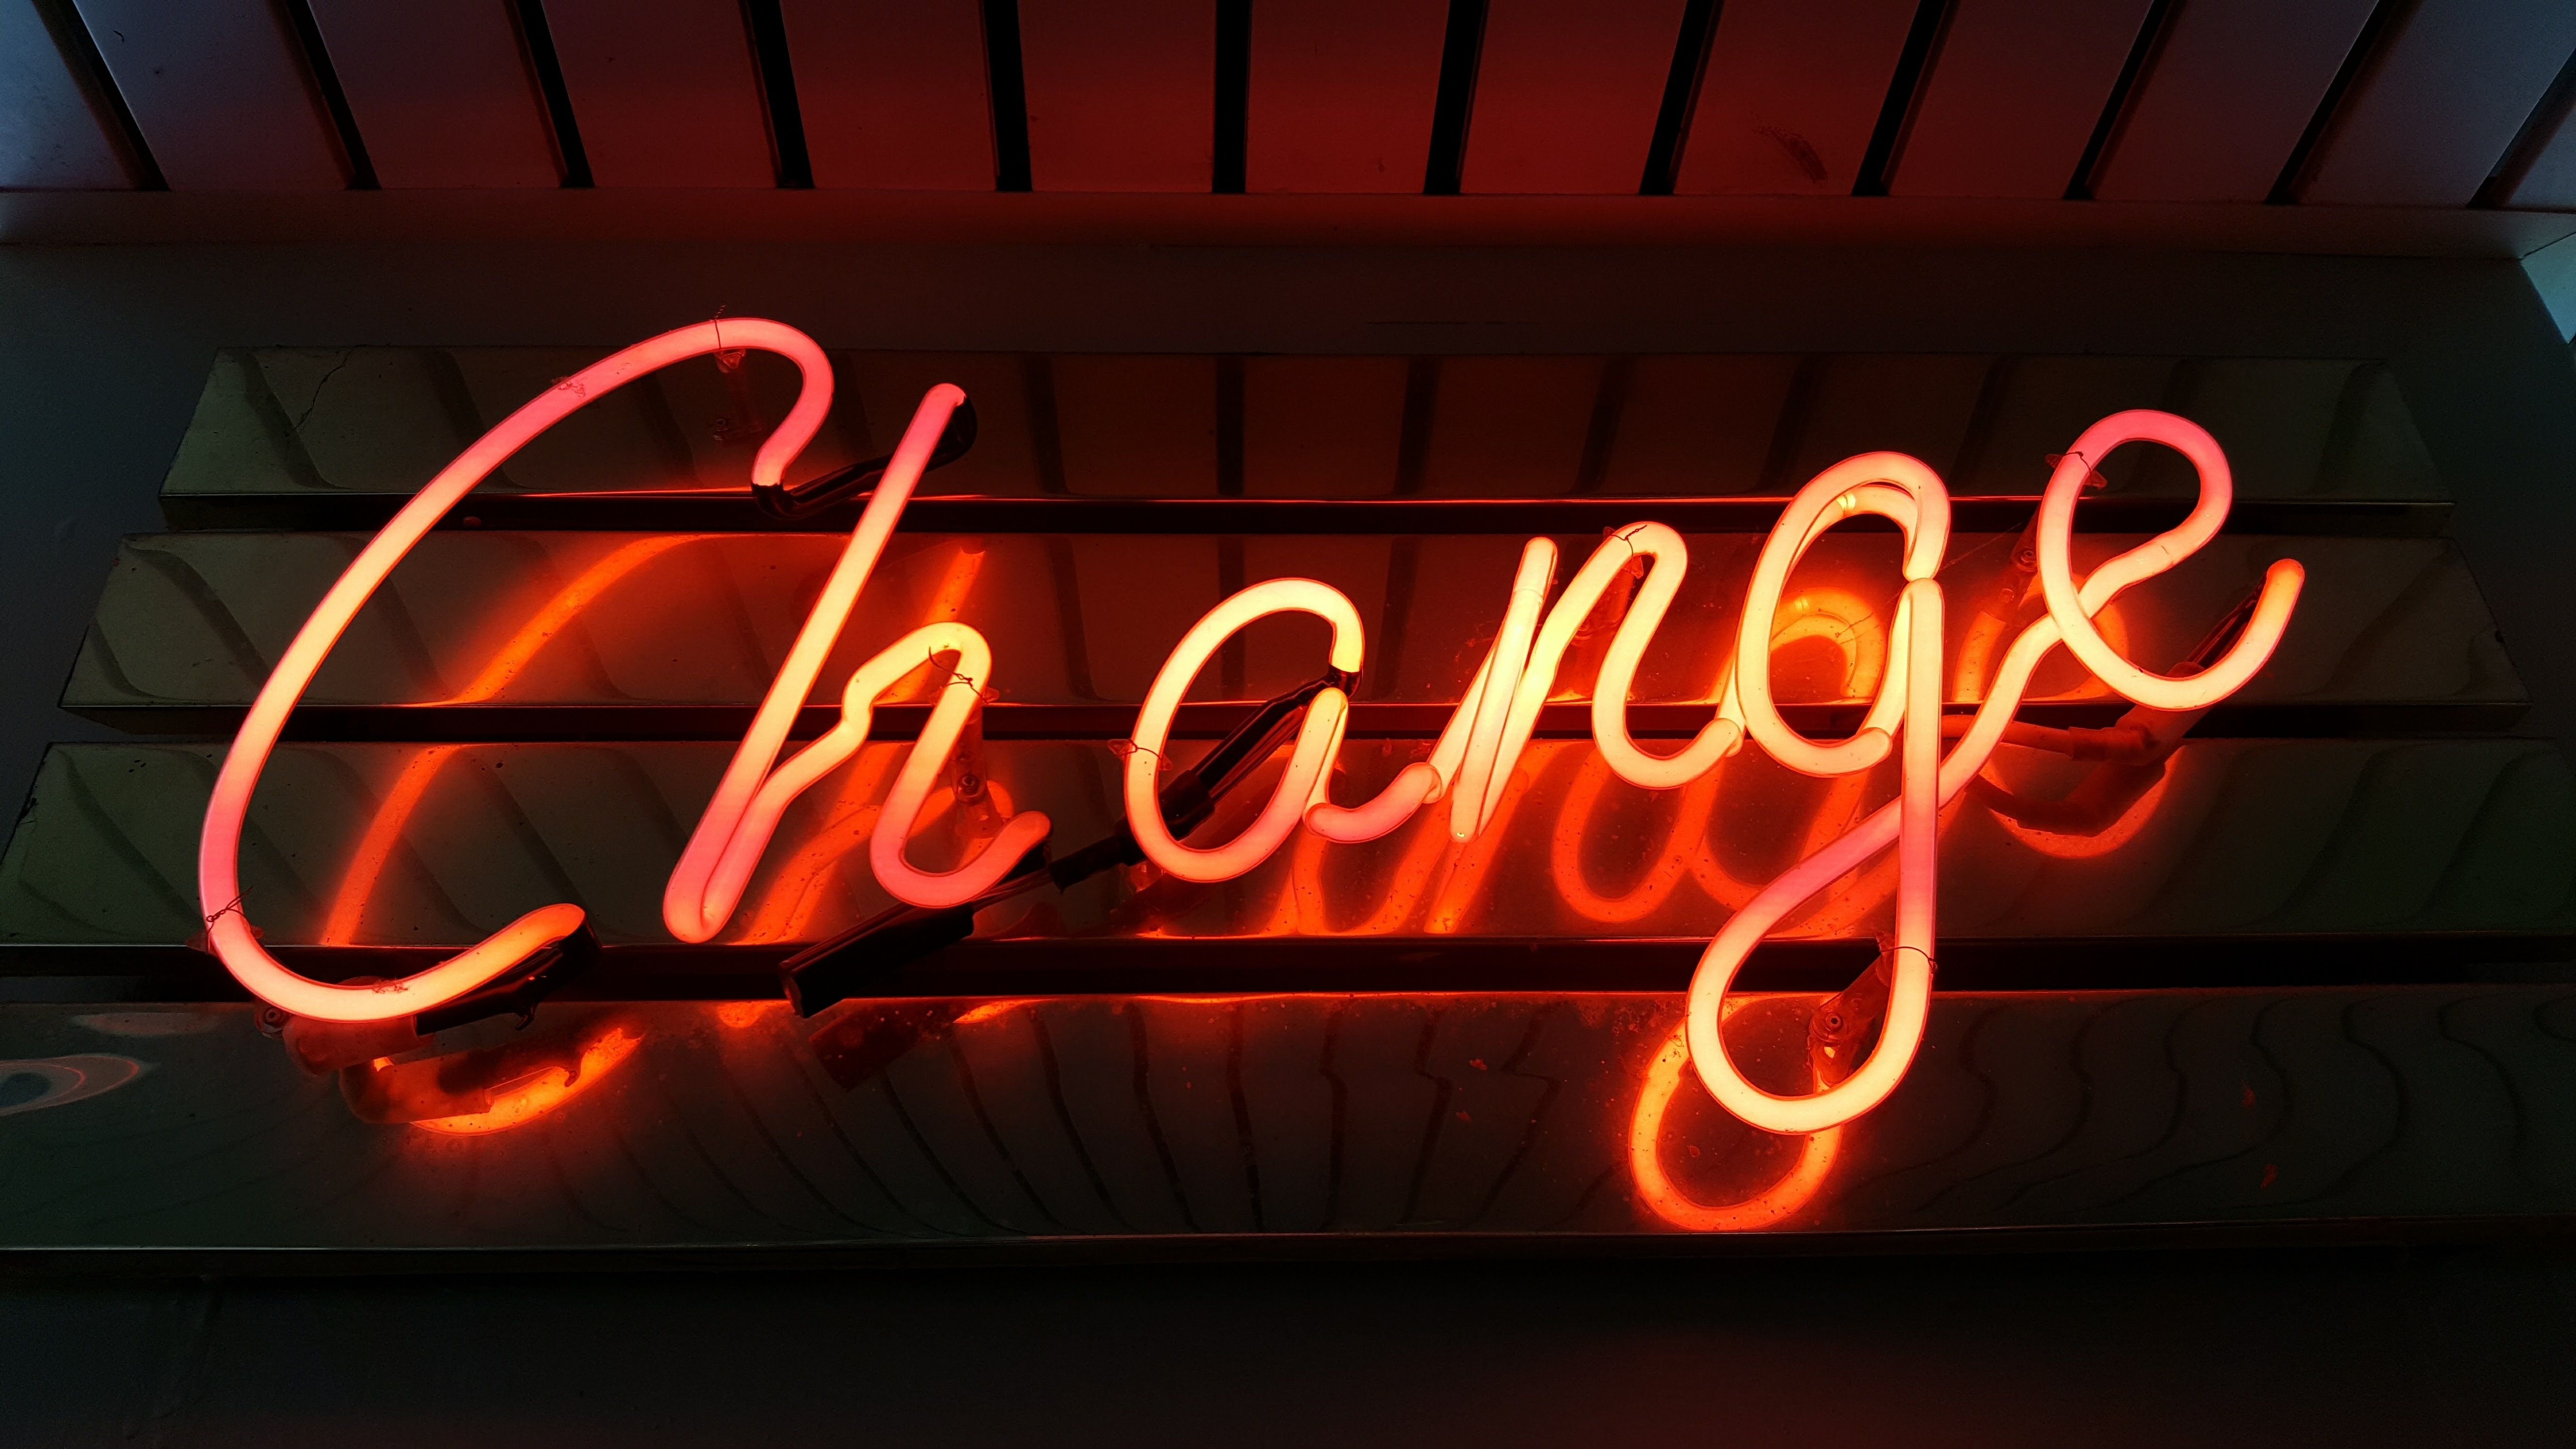 A neon sign that says change